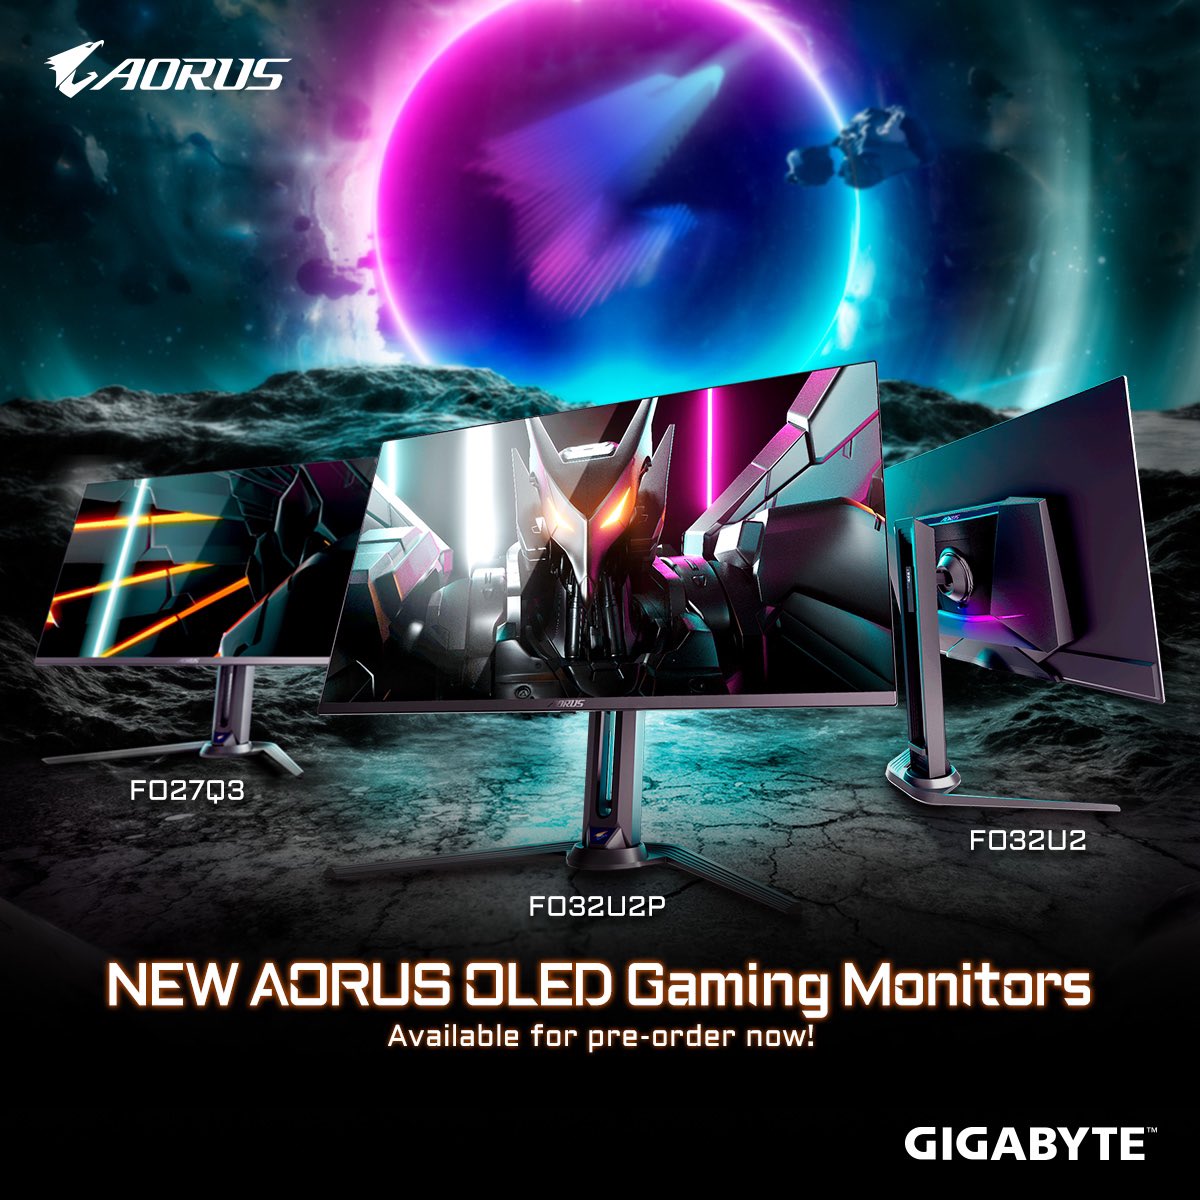 Pre-orders for our latest line of monitors is now LIVE! 🎉
Make the switch to these end-game, QD-OLED monitors now on Newegg: FO32U2, FO32U2P, FO27Q3

➡️ PRE-ORDER HERE: aorus.shop/oled-preorder

#AORUSNA #PAXE2024 #AORUSINFINITY #GIGABYTE #AORUS #PAX #PAXEAST #gaming #monitor